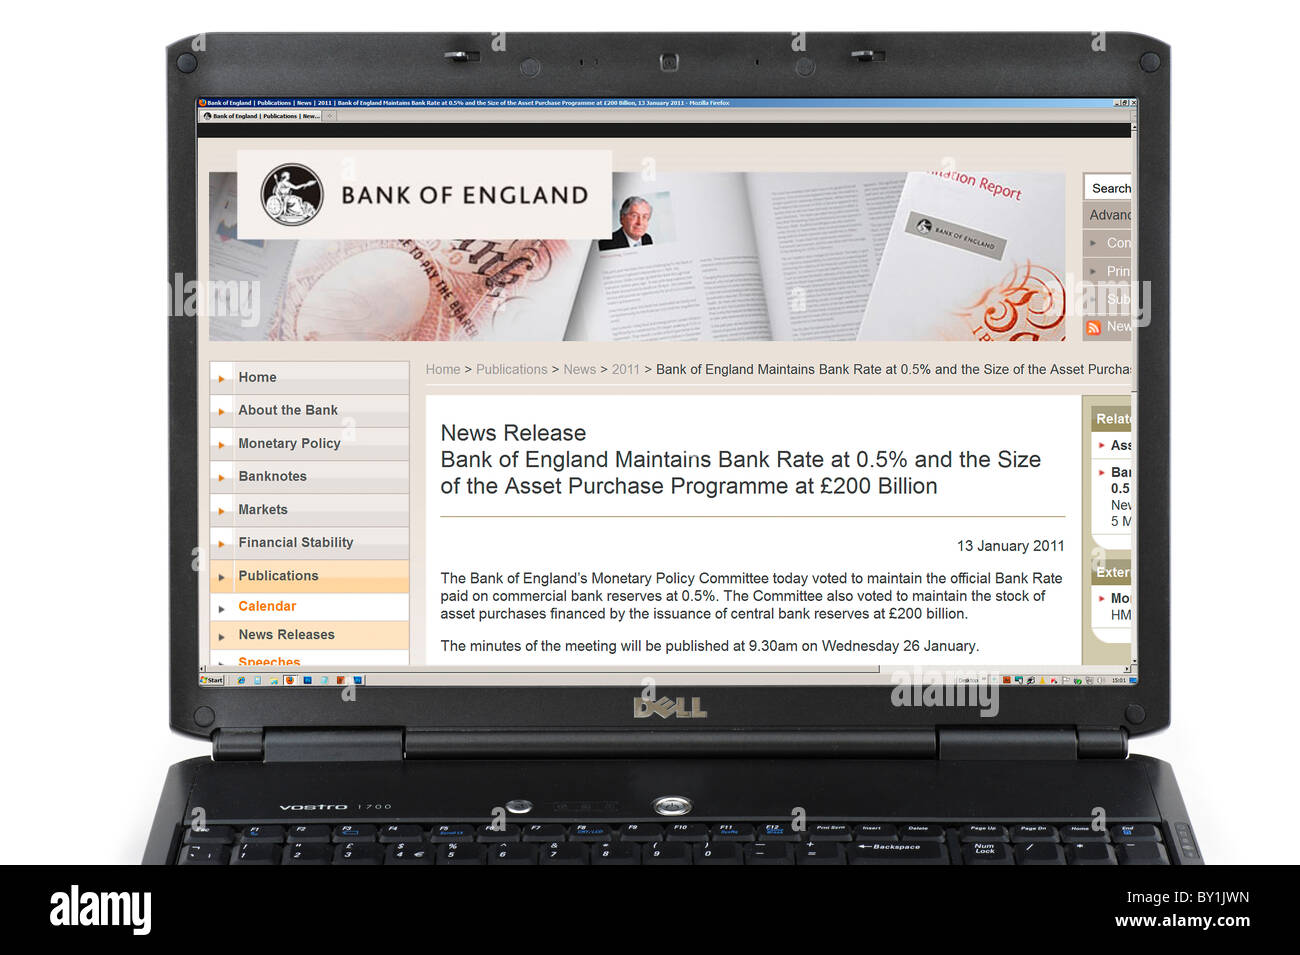 News Release on the Bank of England website about the January 2011 hold in interest rates at 0.5%, UK Stock Photo